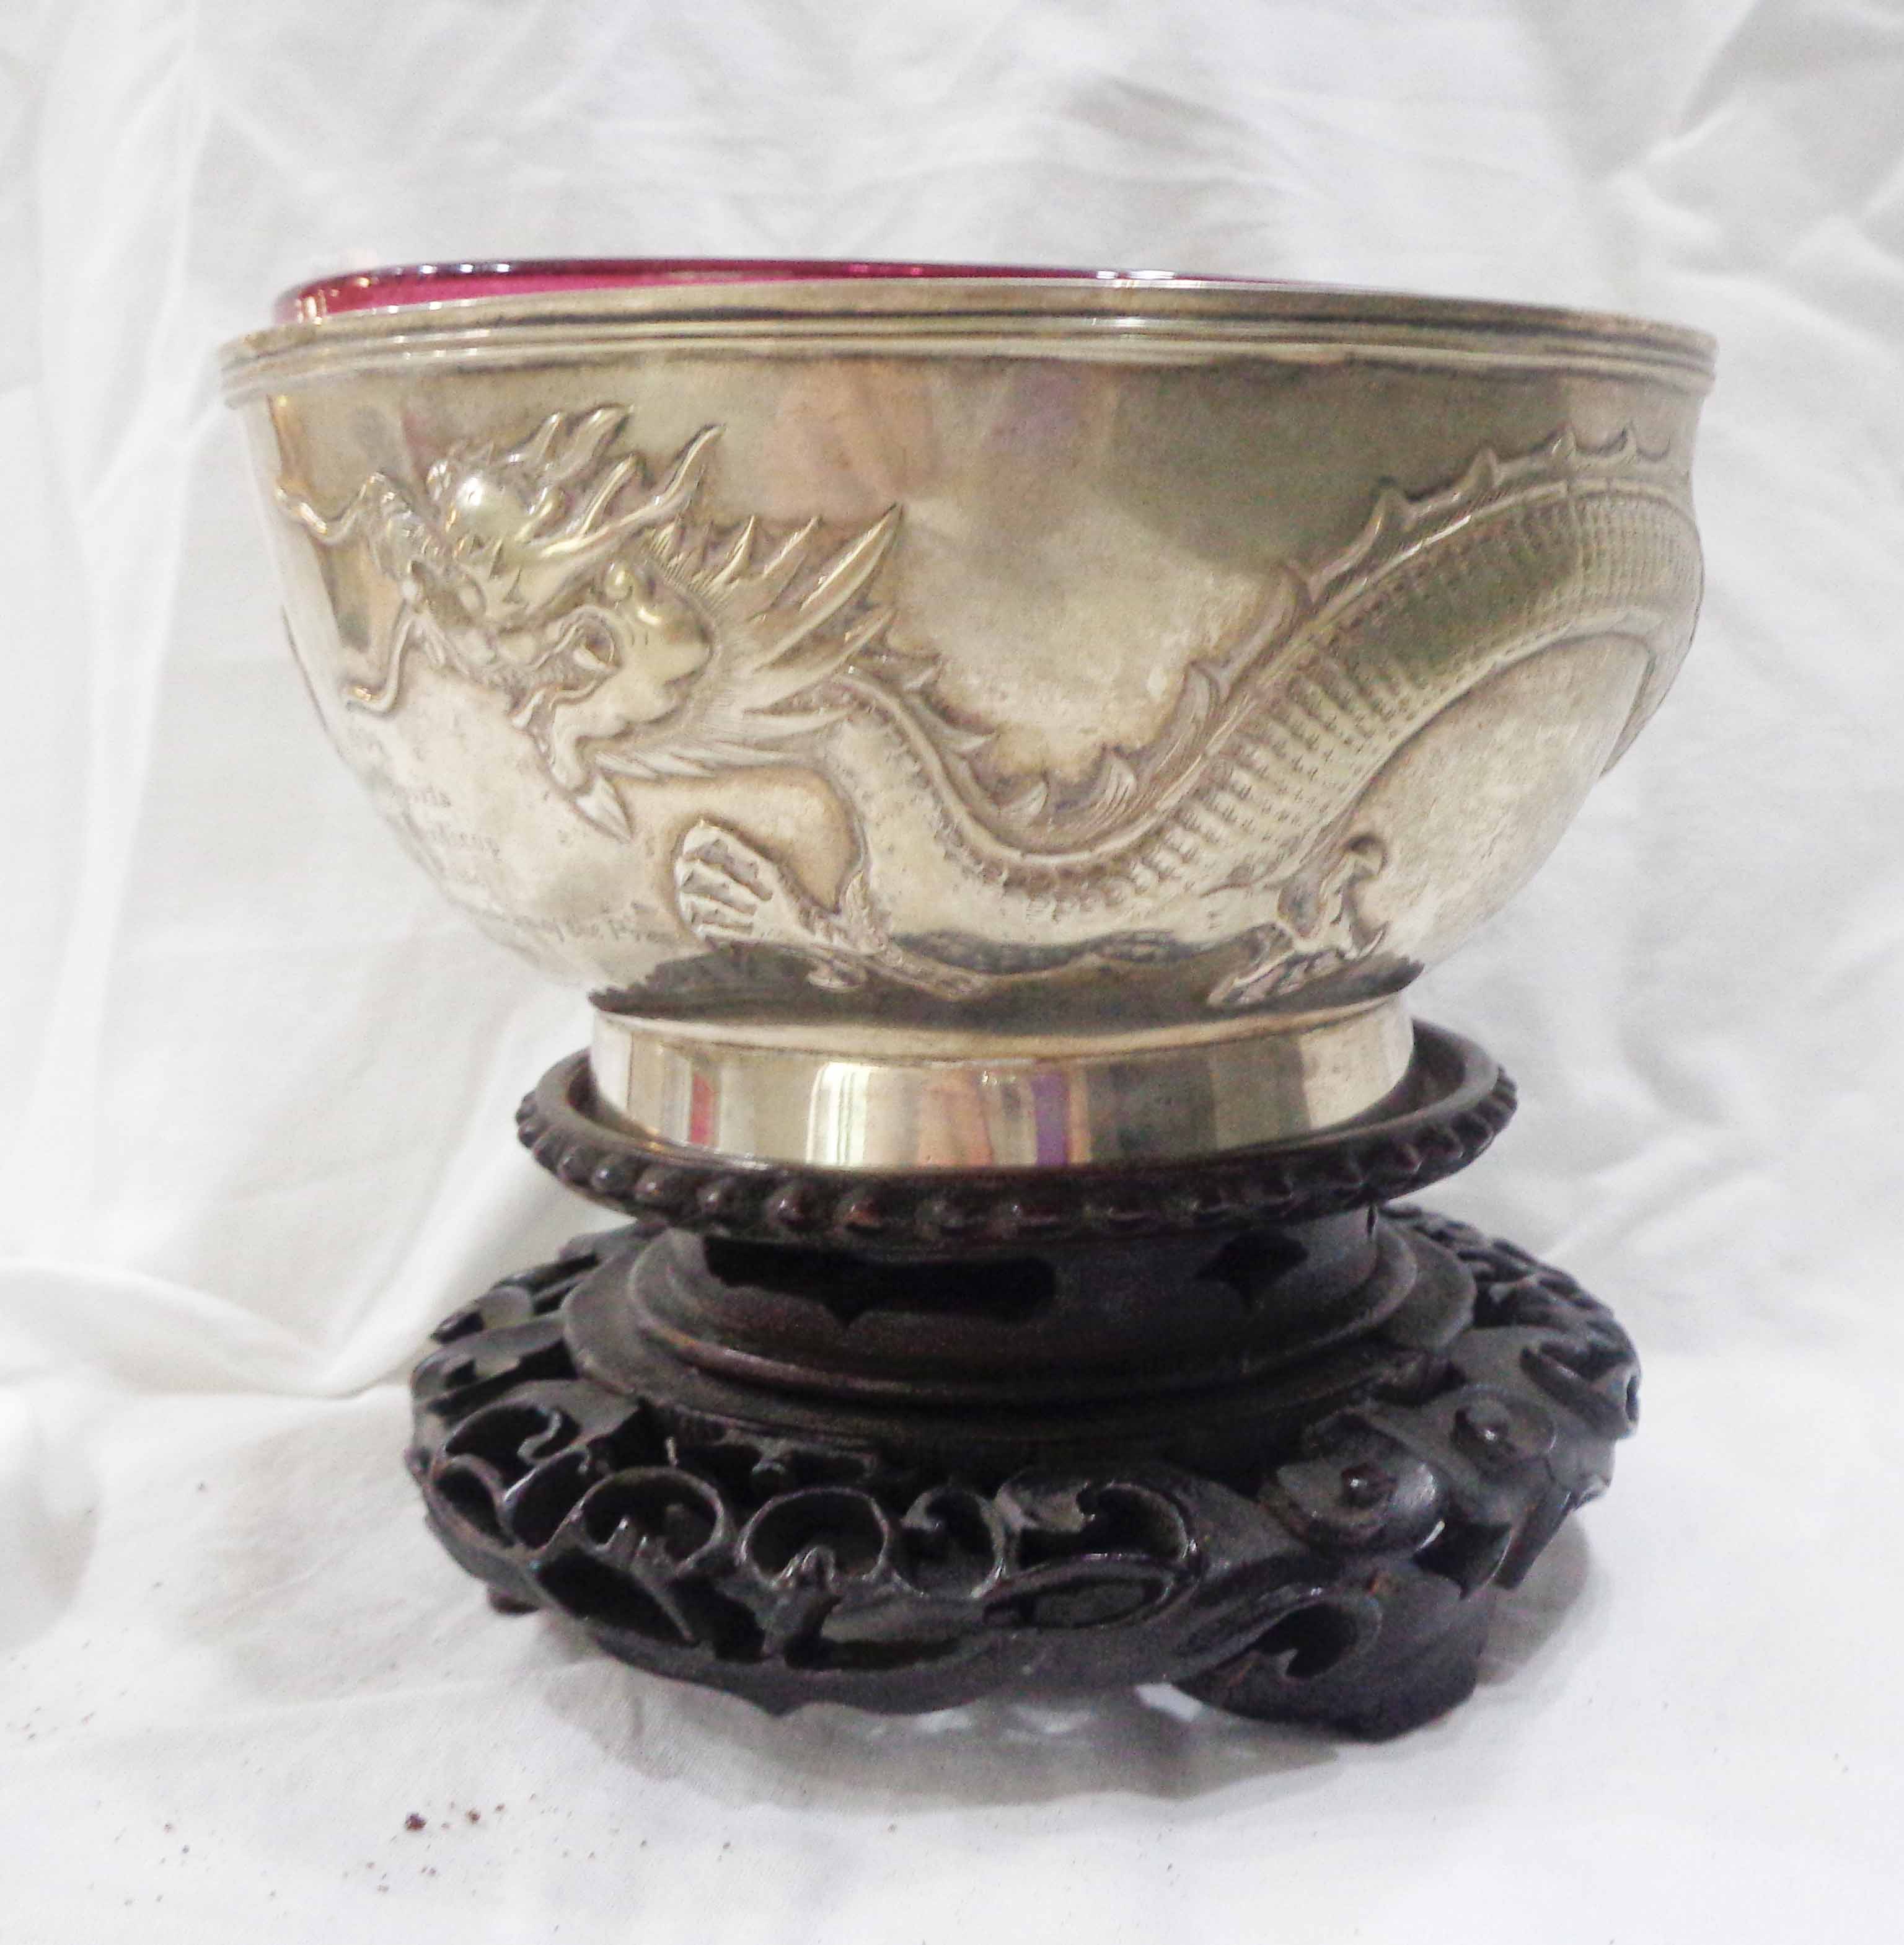 A 13.5cm diameter early 20th Century Chinese Wo Shing white metal footed bowl with embossed writhing